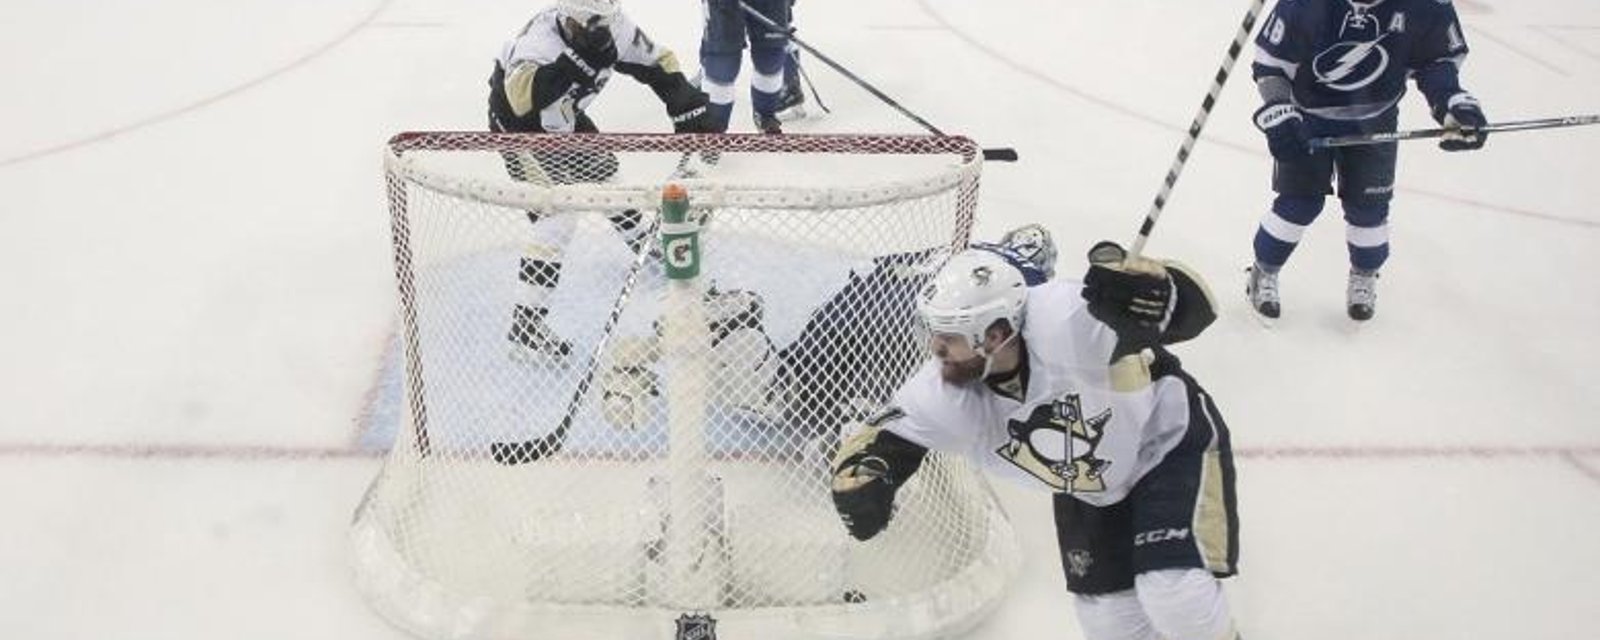 Kessel redirects puck mid air for spectacular opening goal.